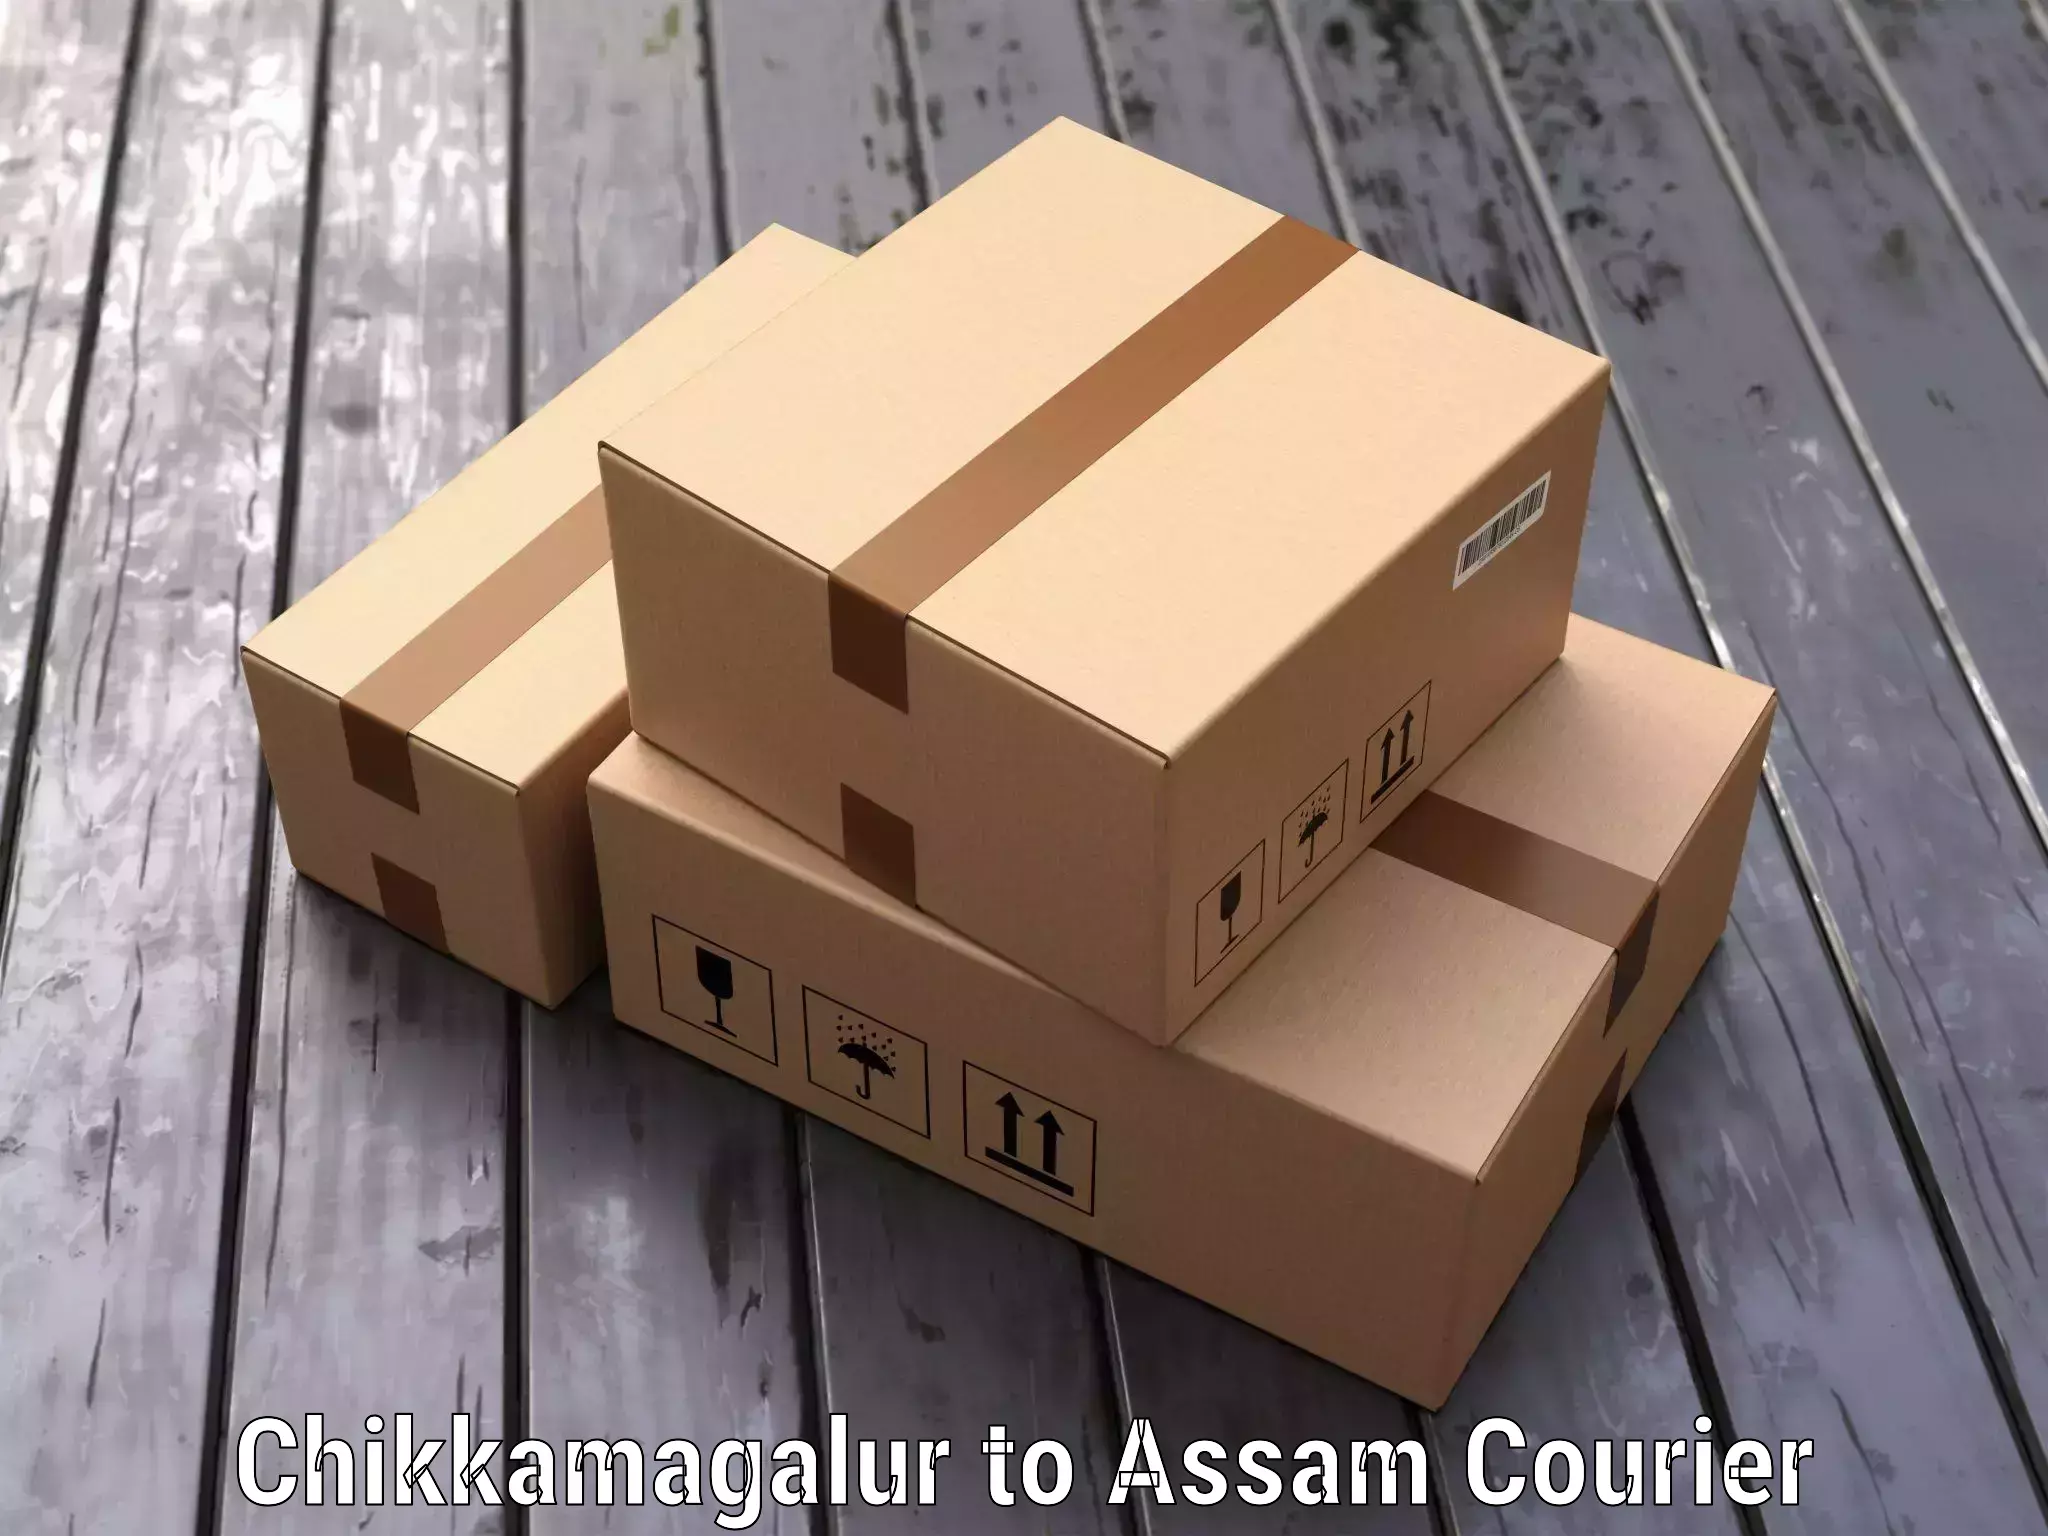 Emergency baggage service Chikkamagalur to Assam